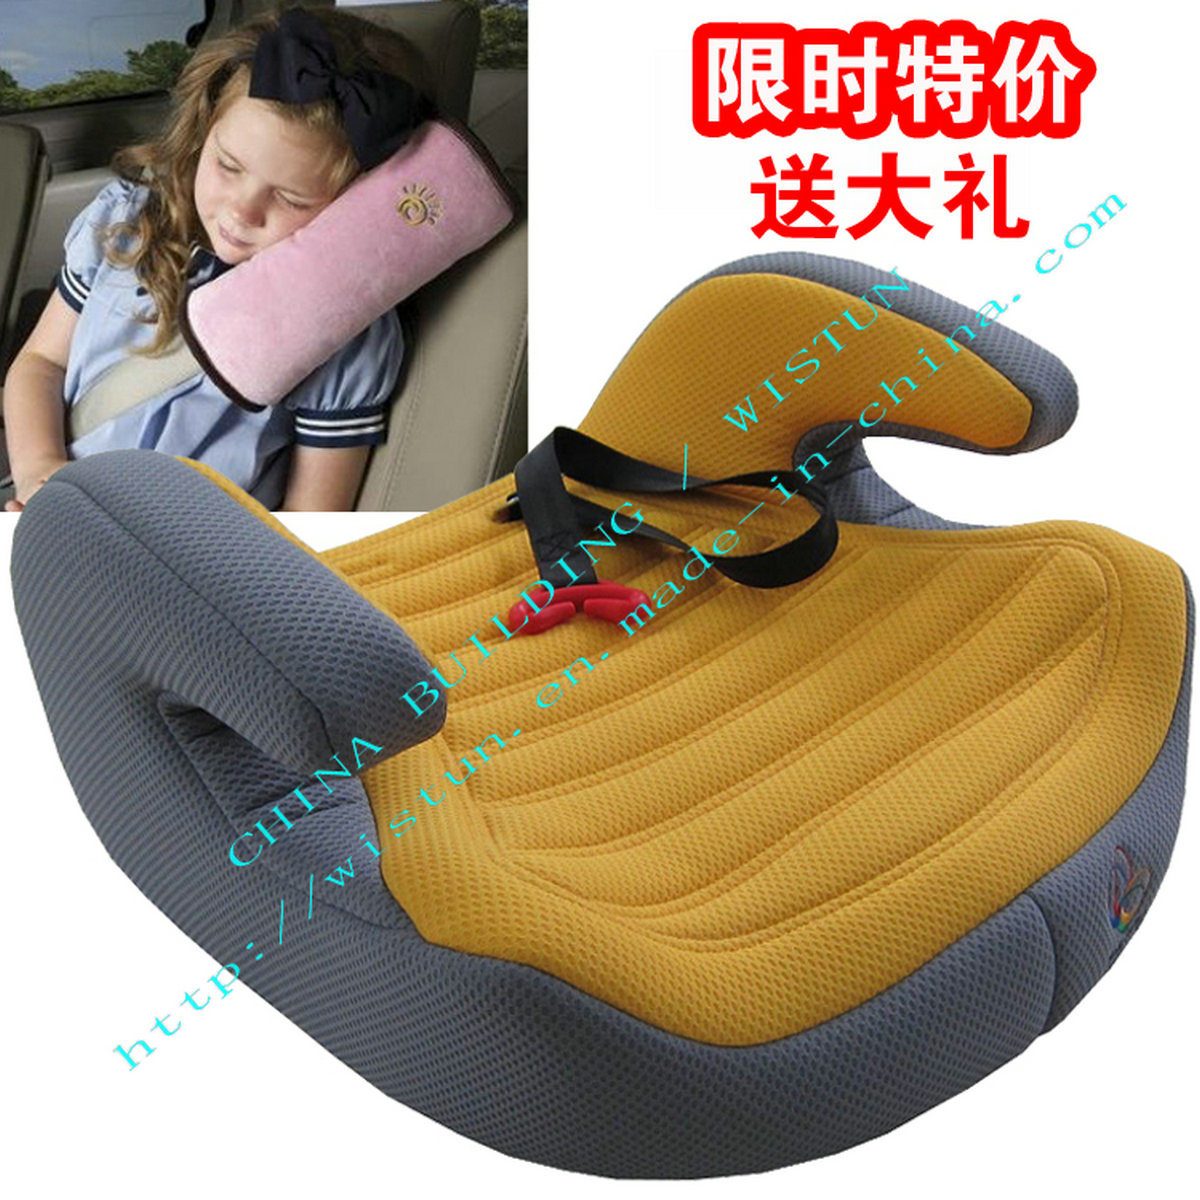 Strong Child Safety Car Seat Cover